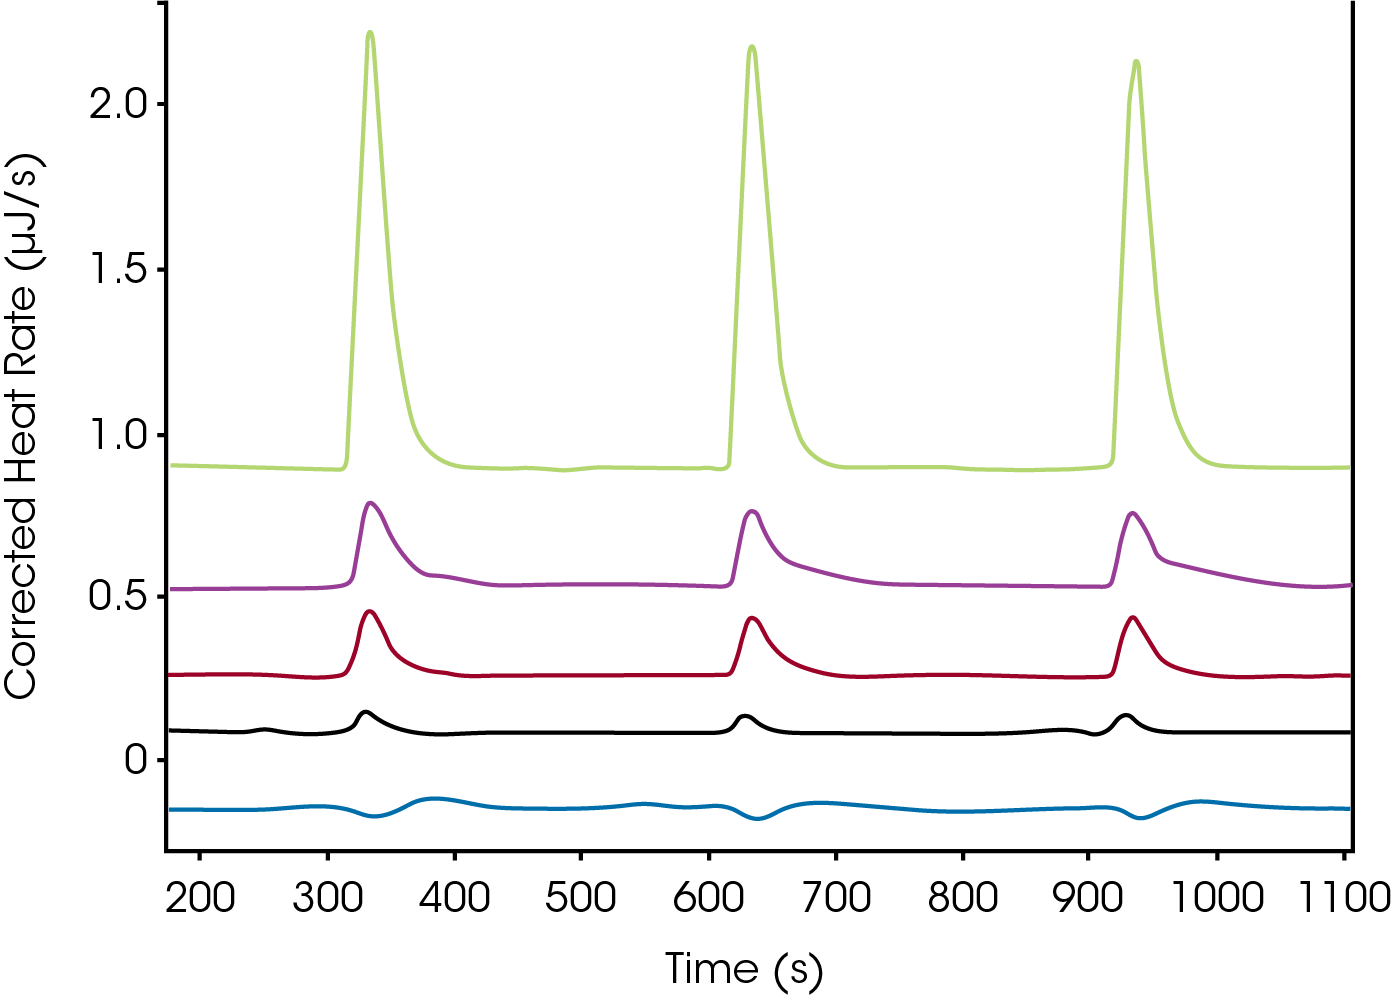 Figure 2. Thermogram of an enthalpy screen. Four ligands, blue, red, purple and green were evaluated and compared to the black control of titrant (macromolecule) into buffer.